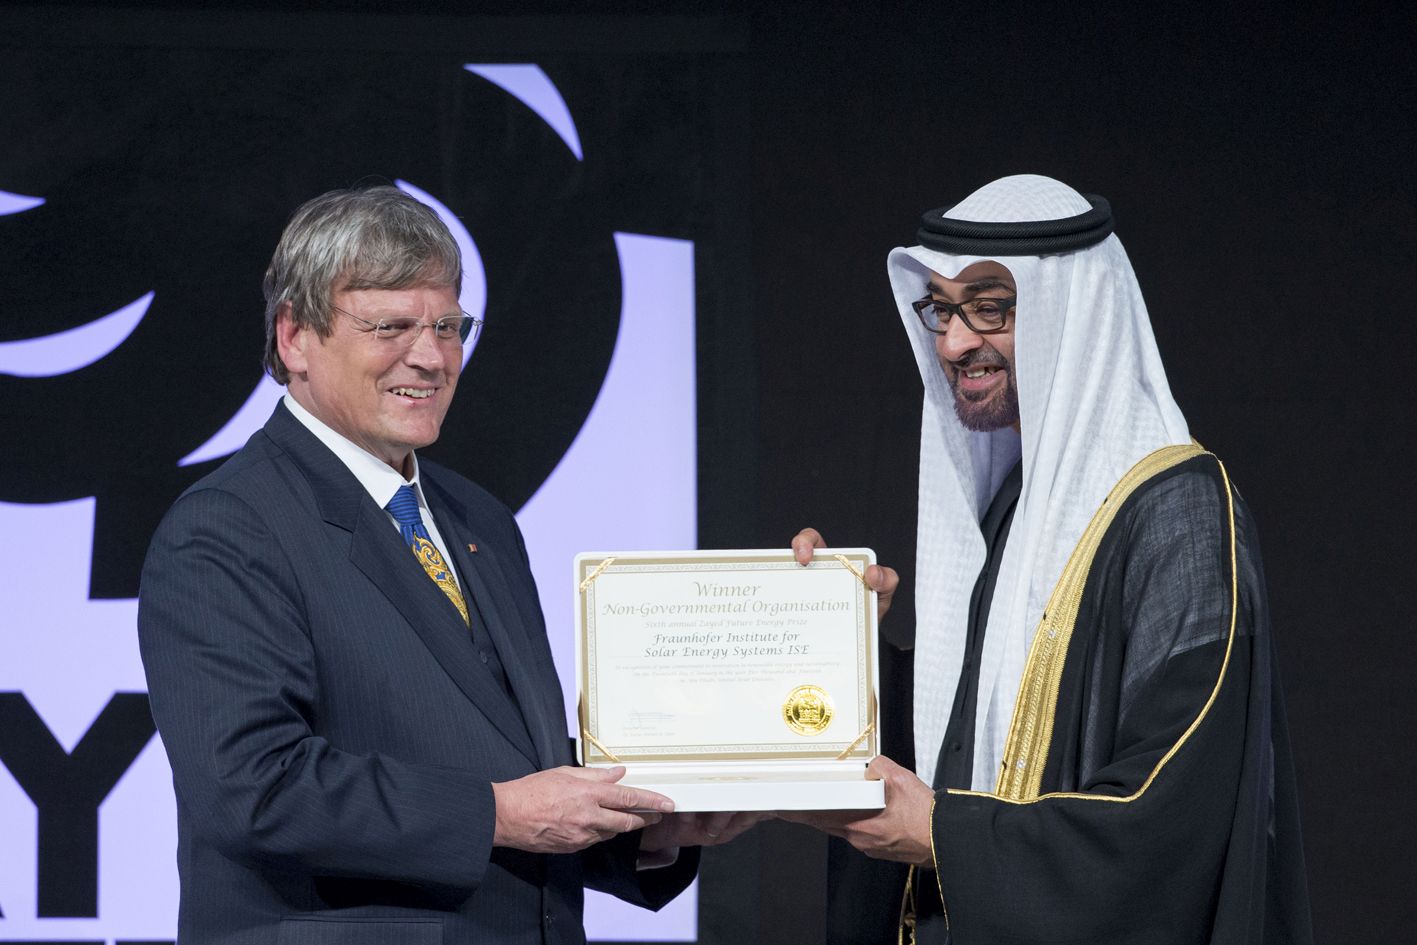 Zayed Future Energy Prize 2014 awarded the Fraunhofer Institute for Solar Energy Systems ISE: Director Prof. Dr. Eicke R. Weber receives the Zayed Future Energy Prize 2014 from His Highness Sheikh Khalifa Bin Zayed Al Nahyan, Crown Prince of Abu, on behalf of the Institute. The prize is endowed with 1.5 million US dollars